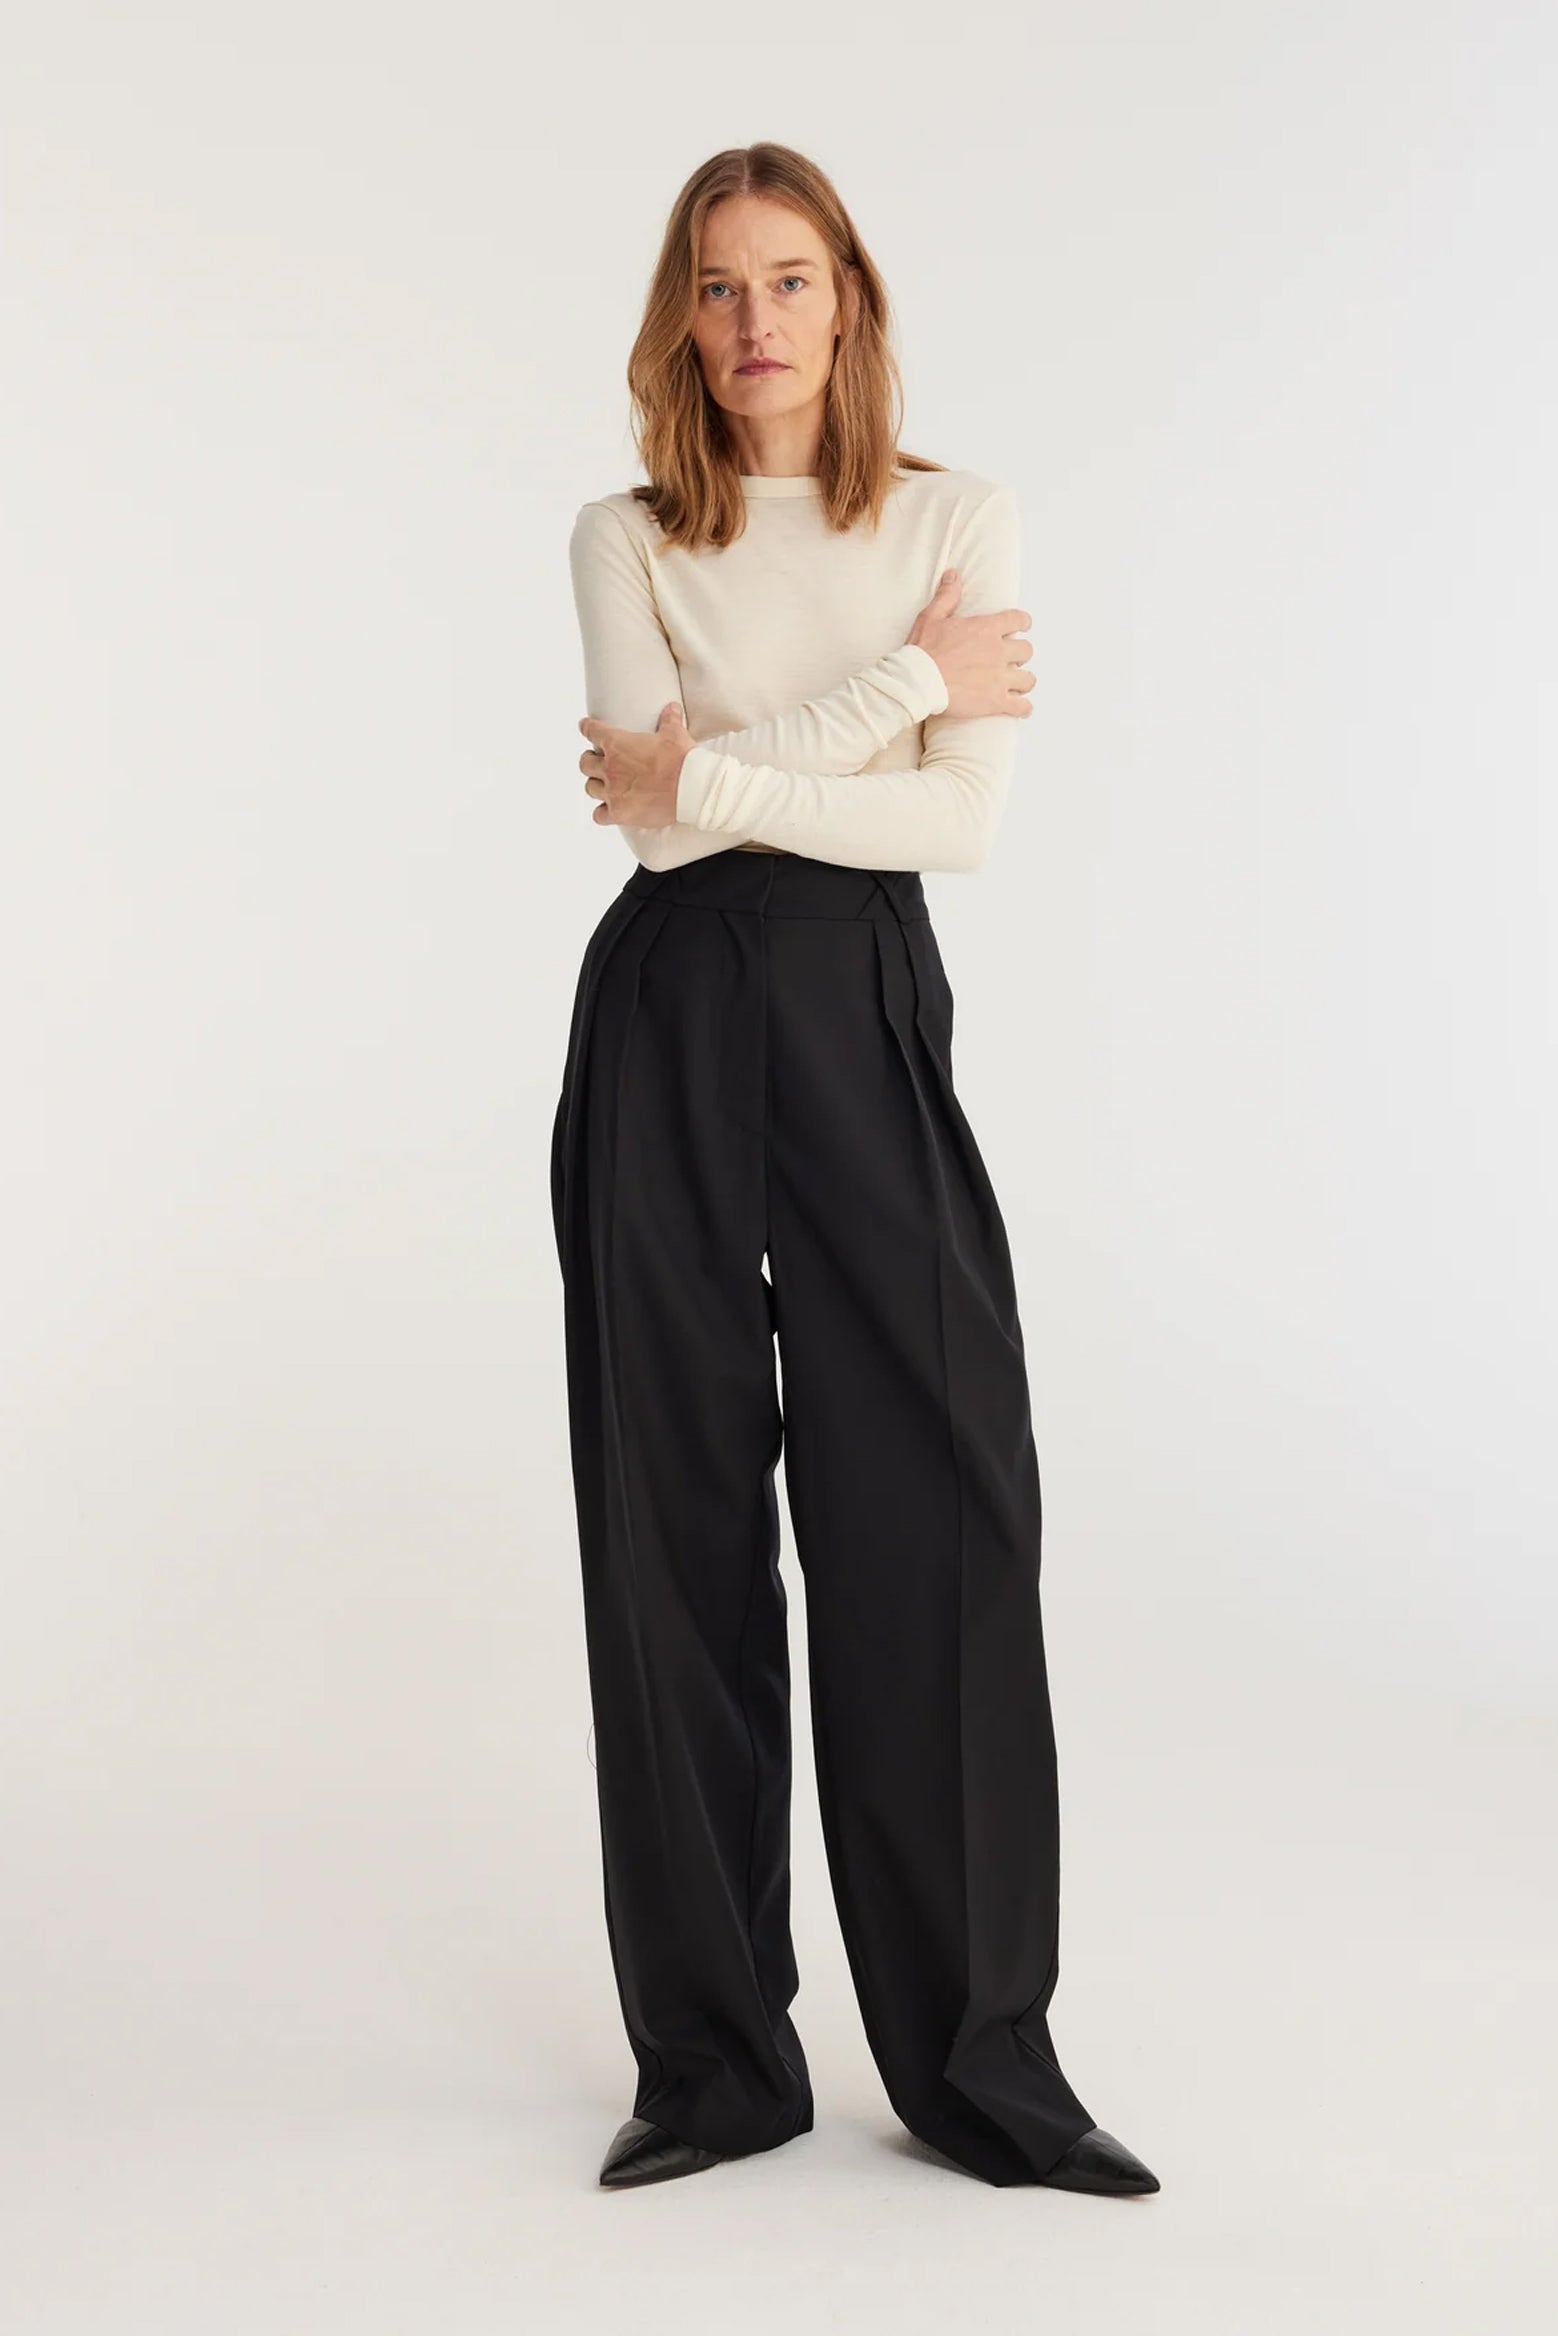 Rohe Wide Leg Tailored Trouser in Noir available at The New Trend Australia.